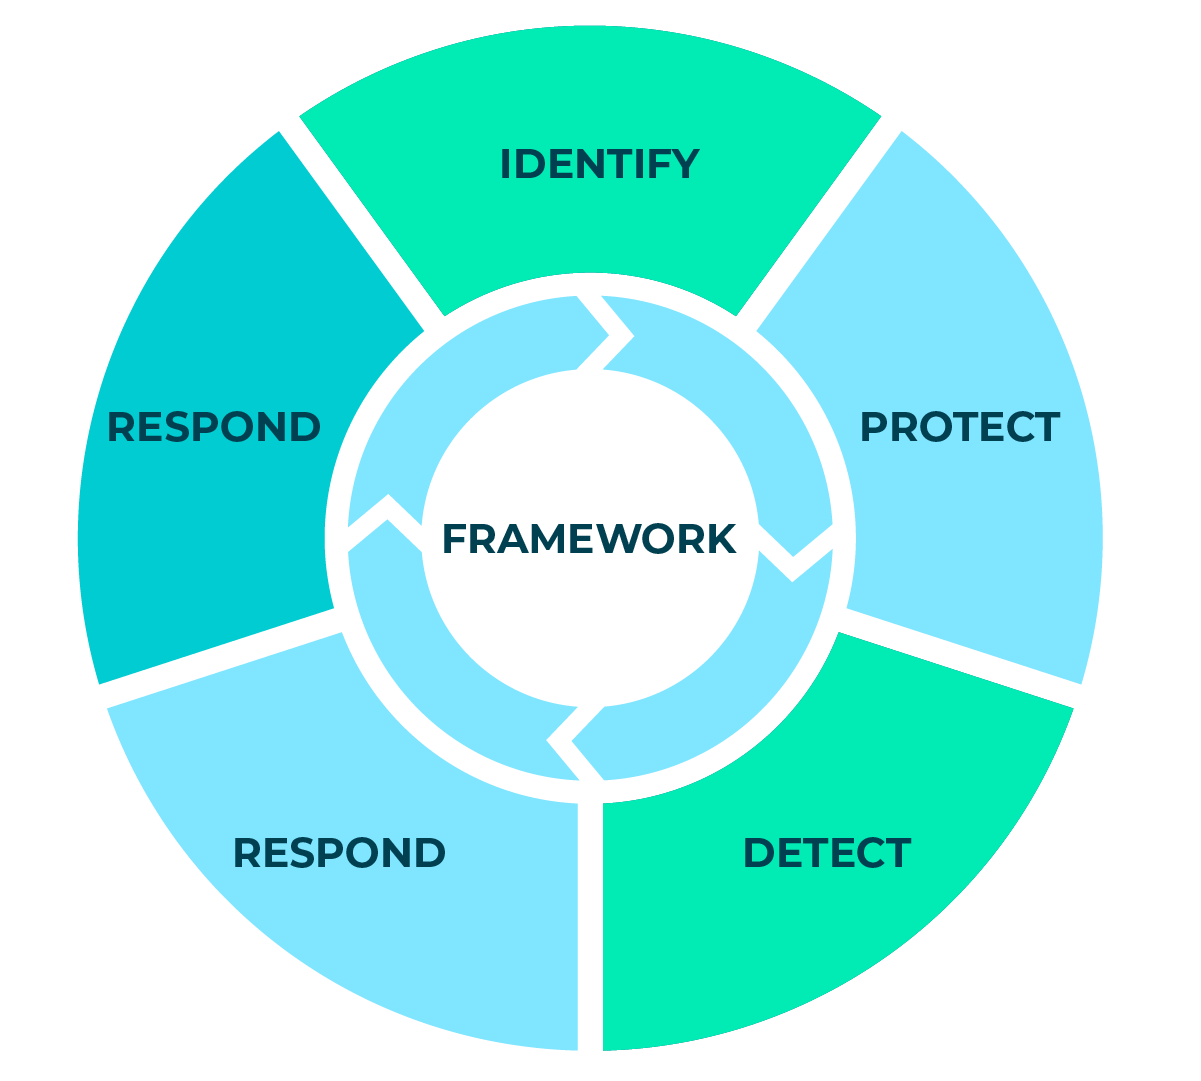 The NIST framework, made up of five segments, identify, protect, detect, respond, and recover.